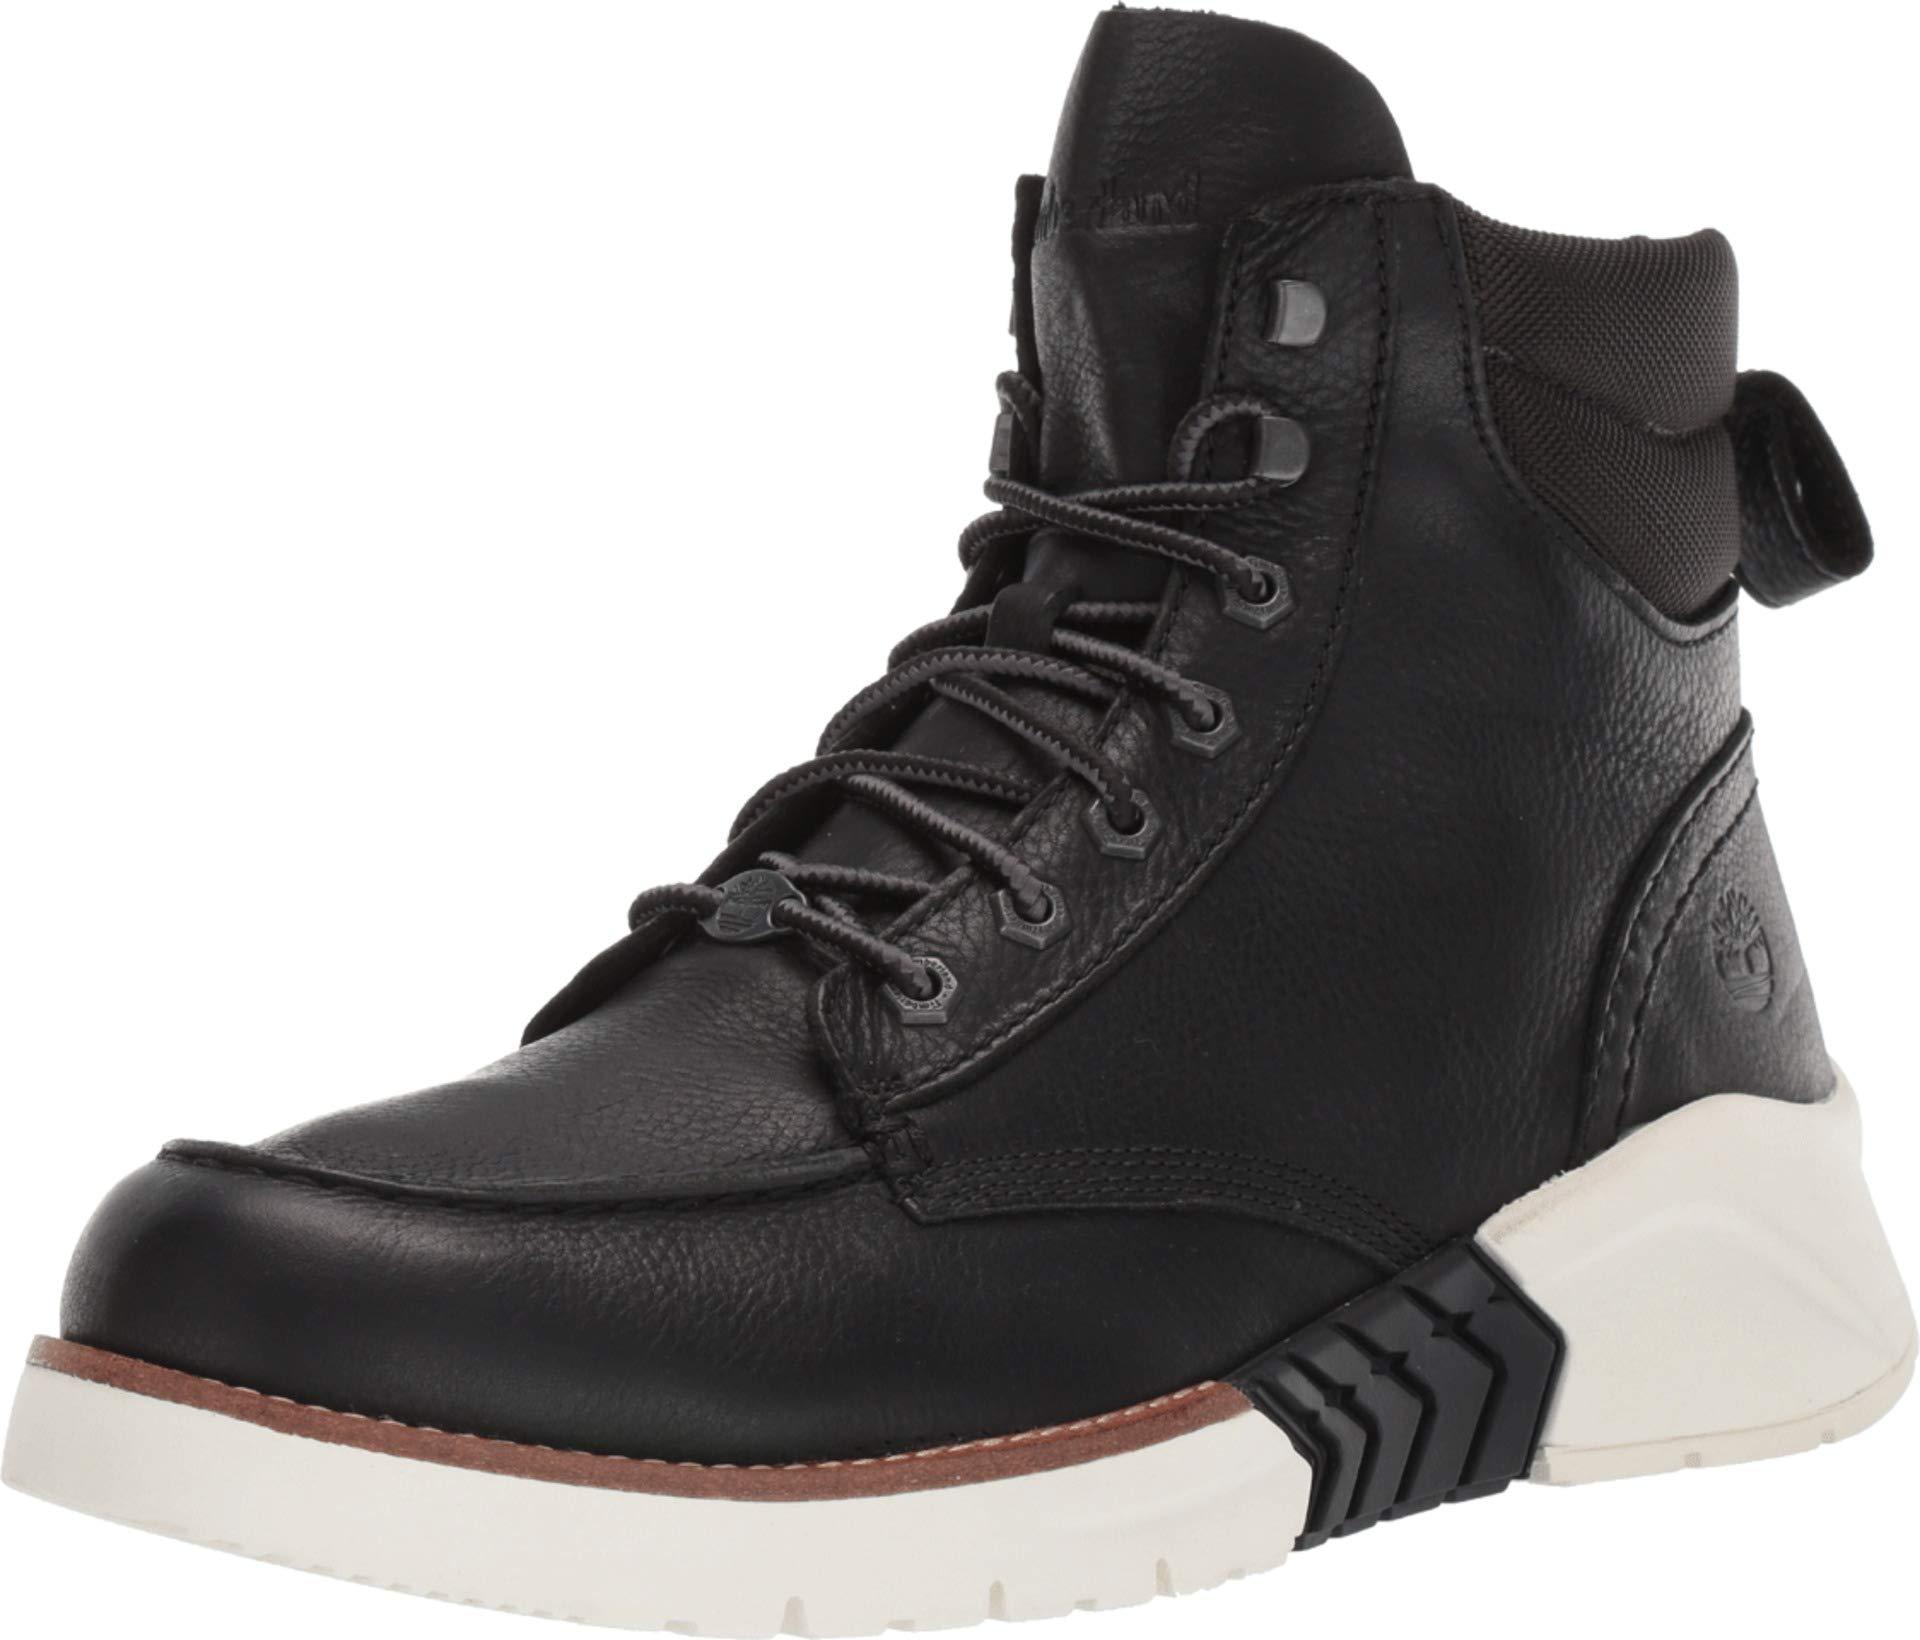 Timberland Leather M.t.c.r. Moc Toe Boot in Black for Men - Lyst